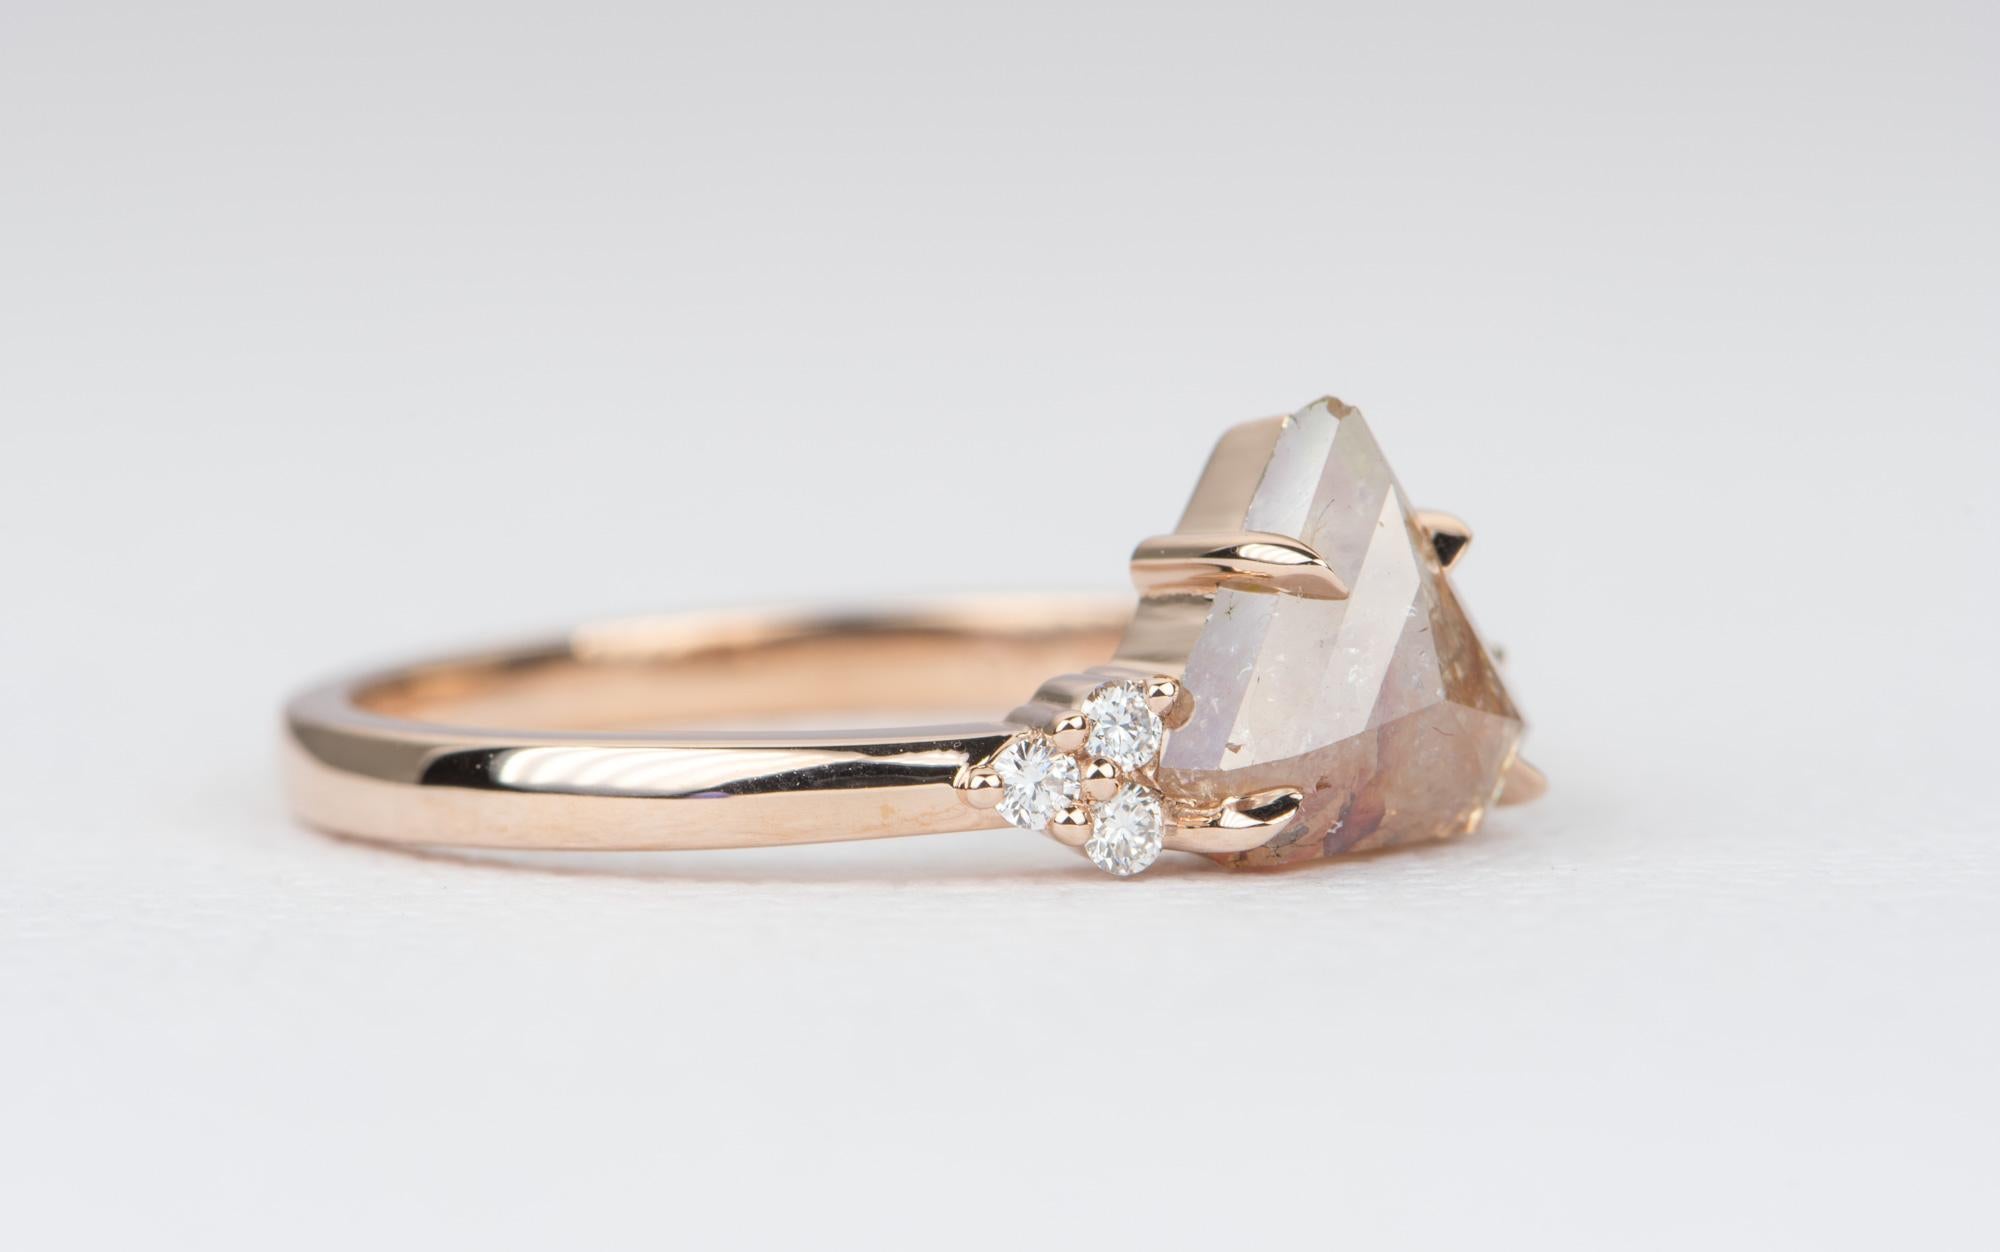 ♥  Solid 14K rose gold ring with a reddish-coral color center diamond in the center
♥  A trio of diamonds accent the center diamond on each side
♥  The overall setting measures 13.16mm in width, 7.60mm in length, and sits 5.03mm tall from the